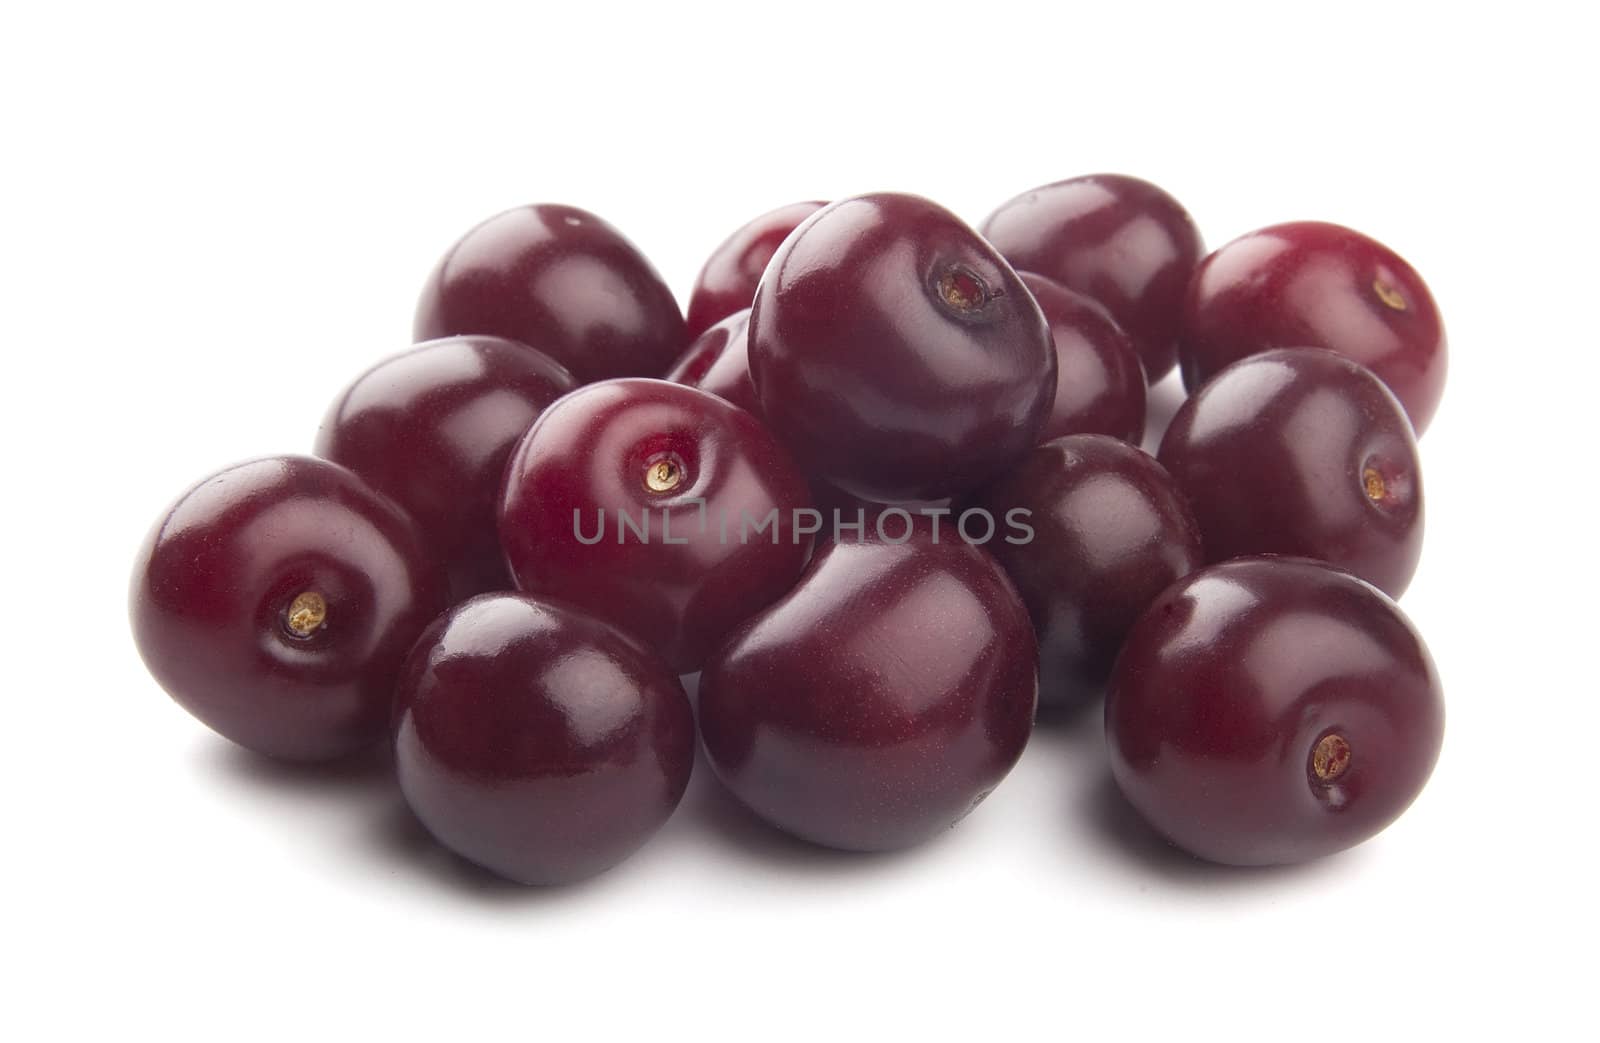 Handful of red cherries on the white